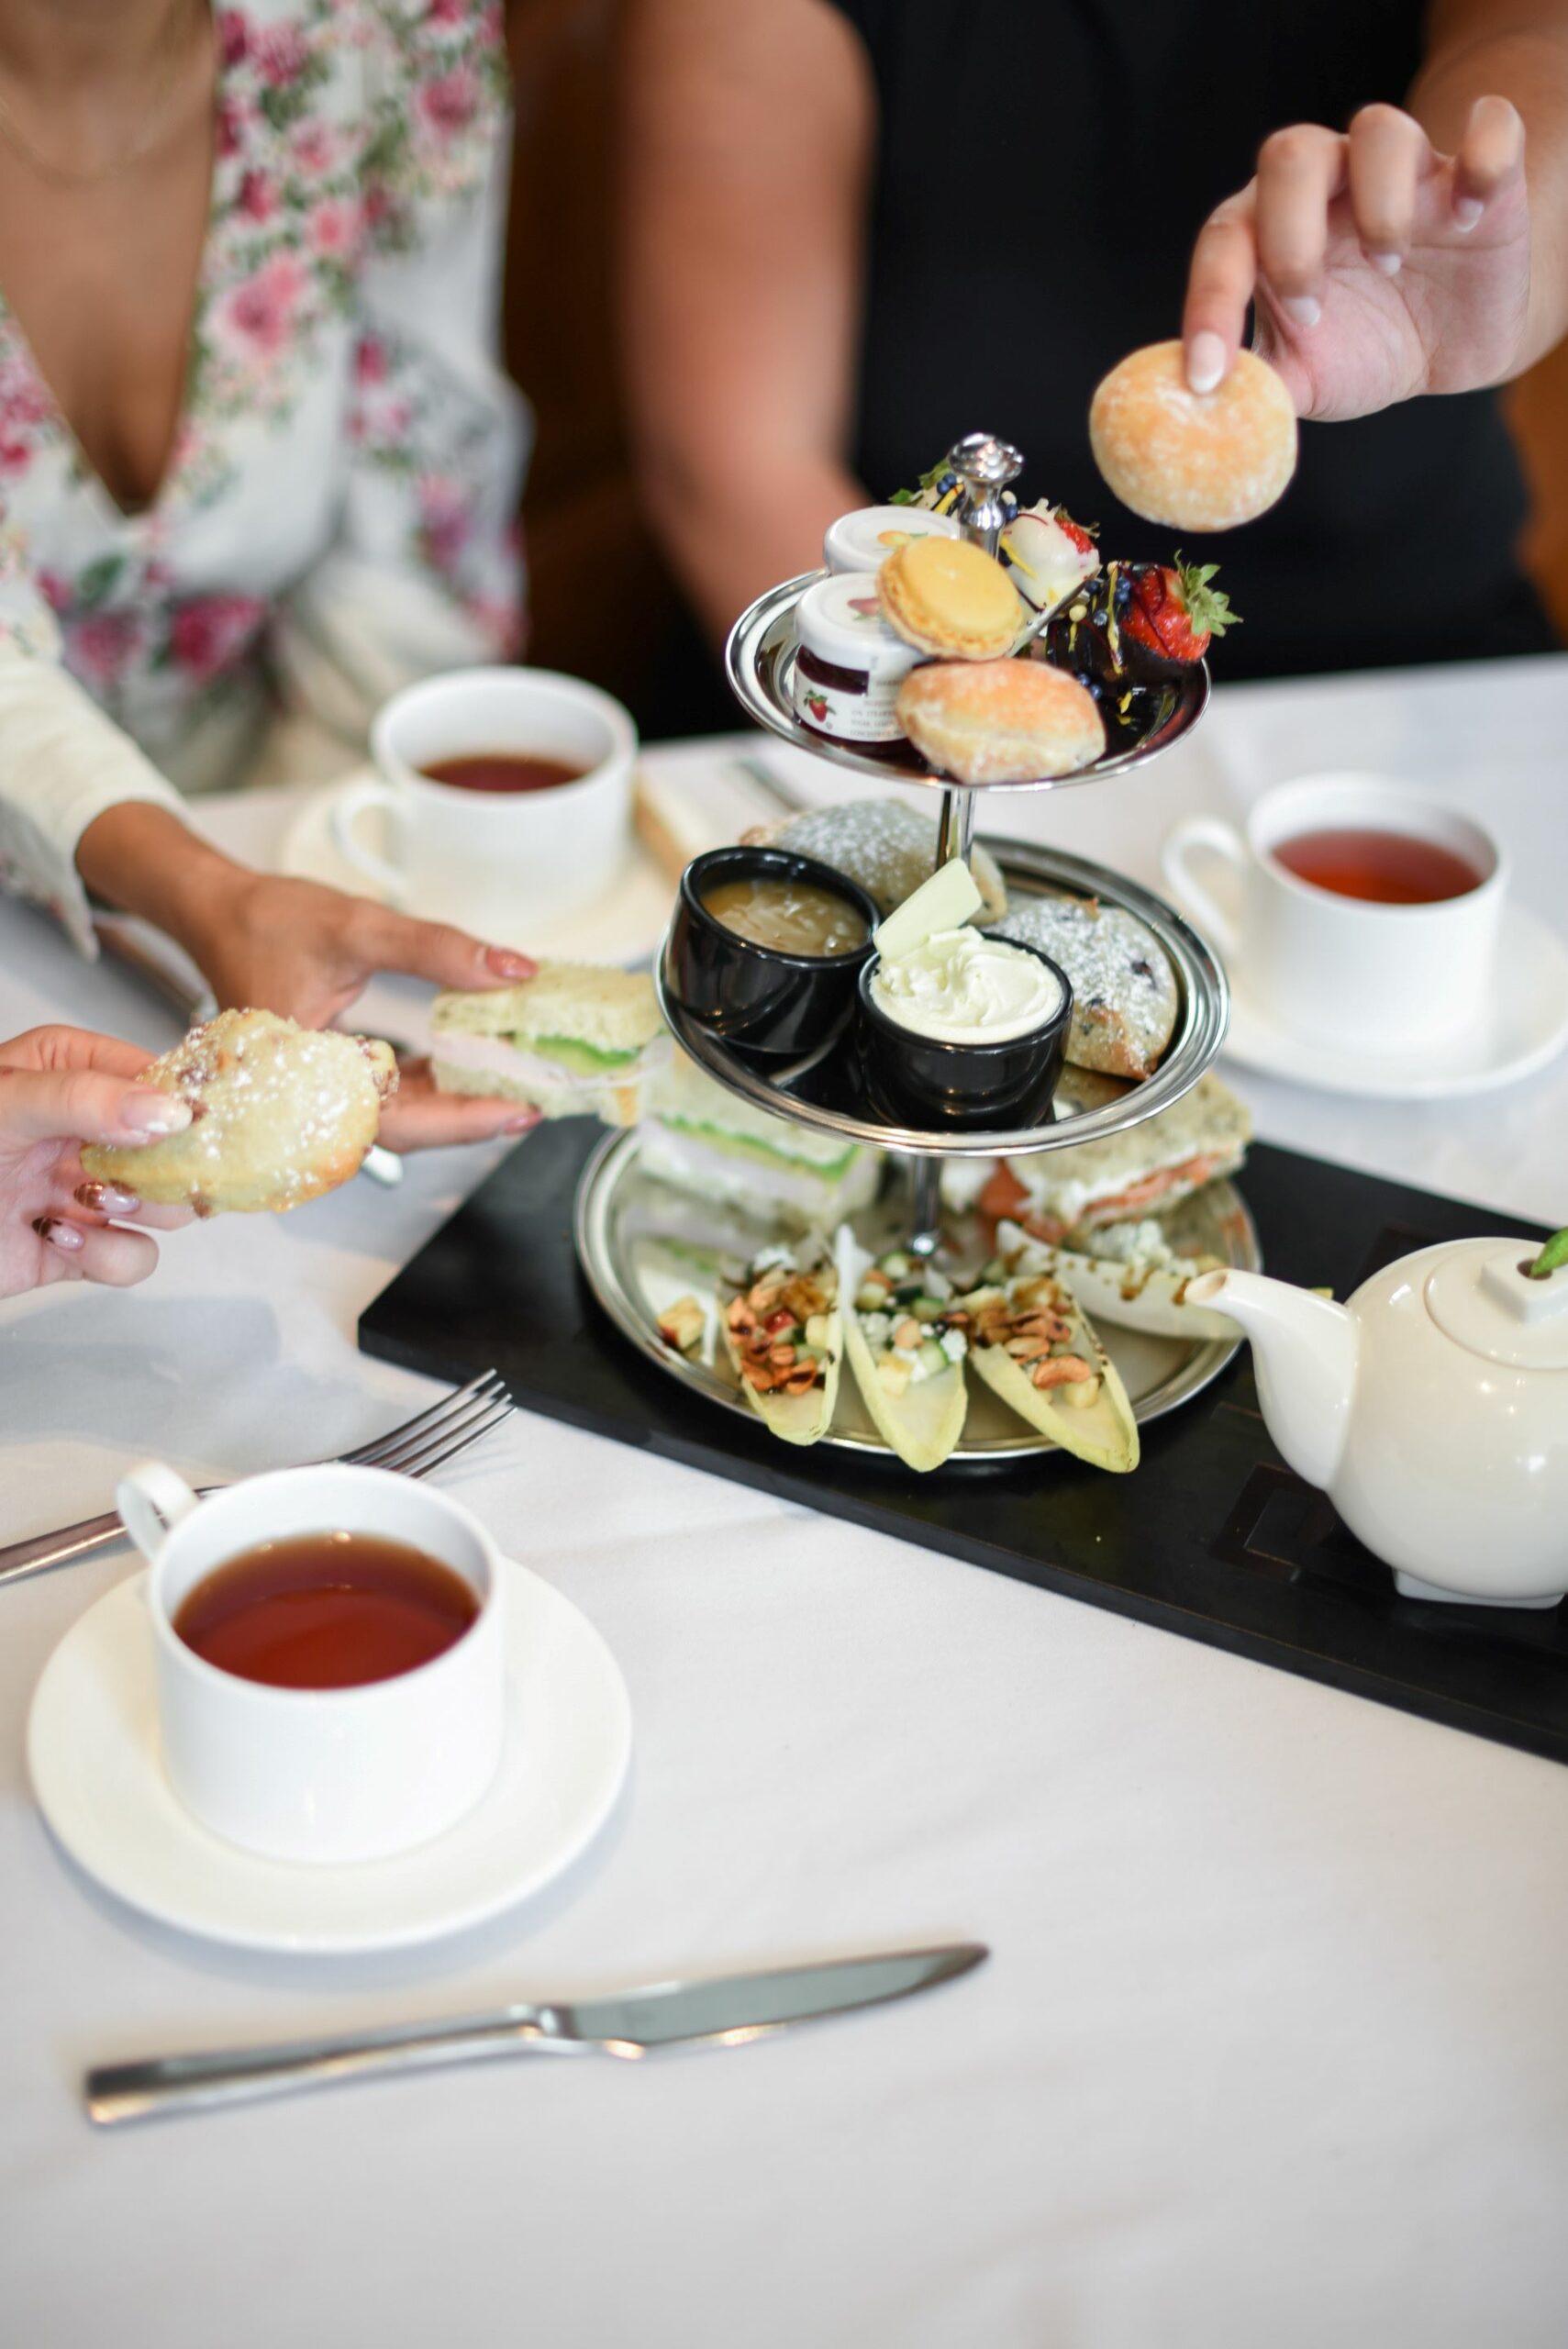 An image of people drinking tea and a tower of tea sandwiches and desserts.